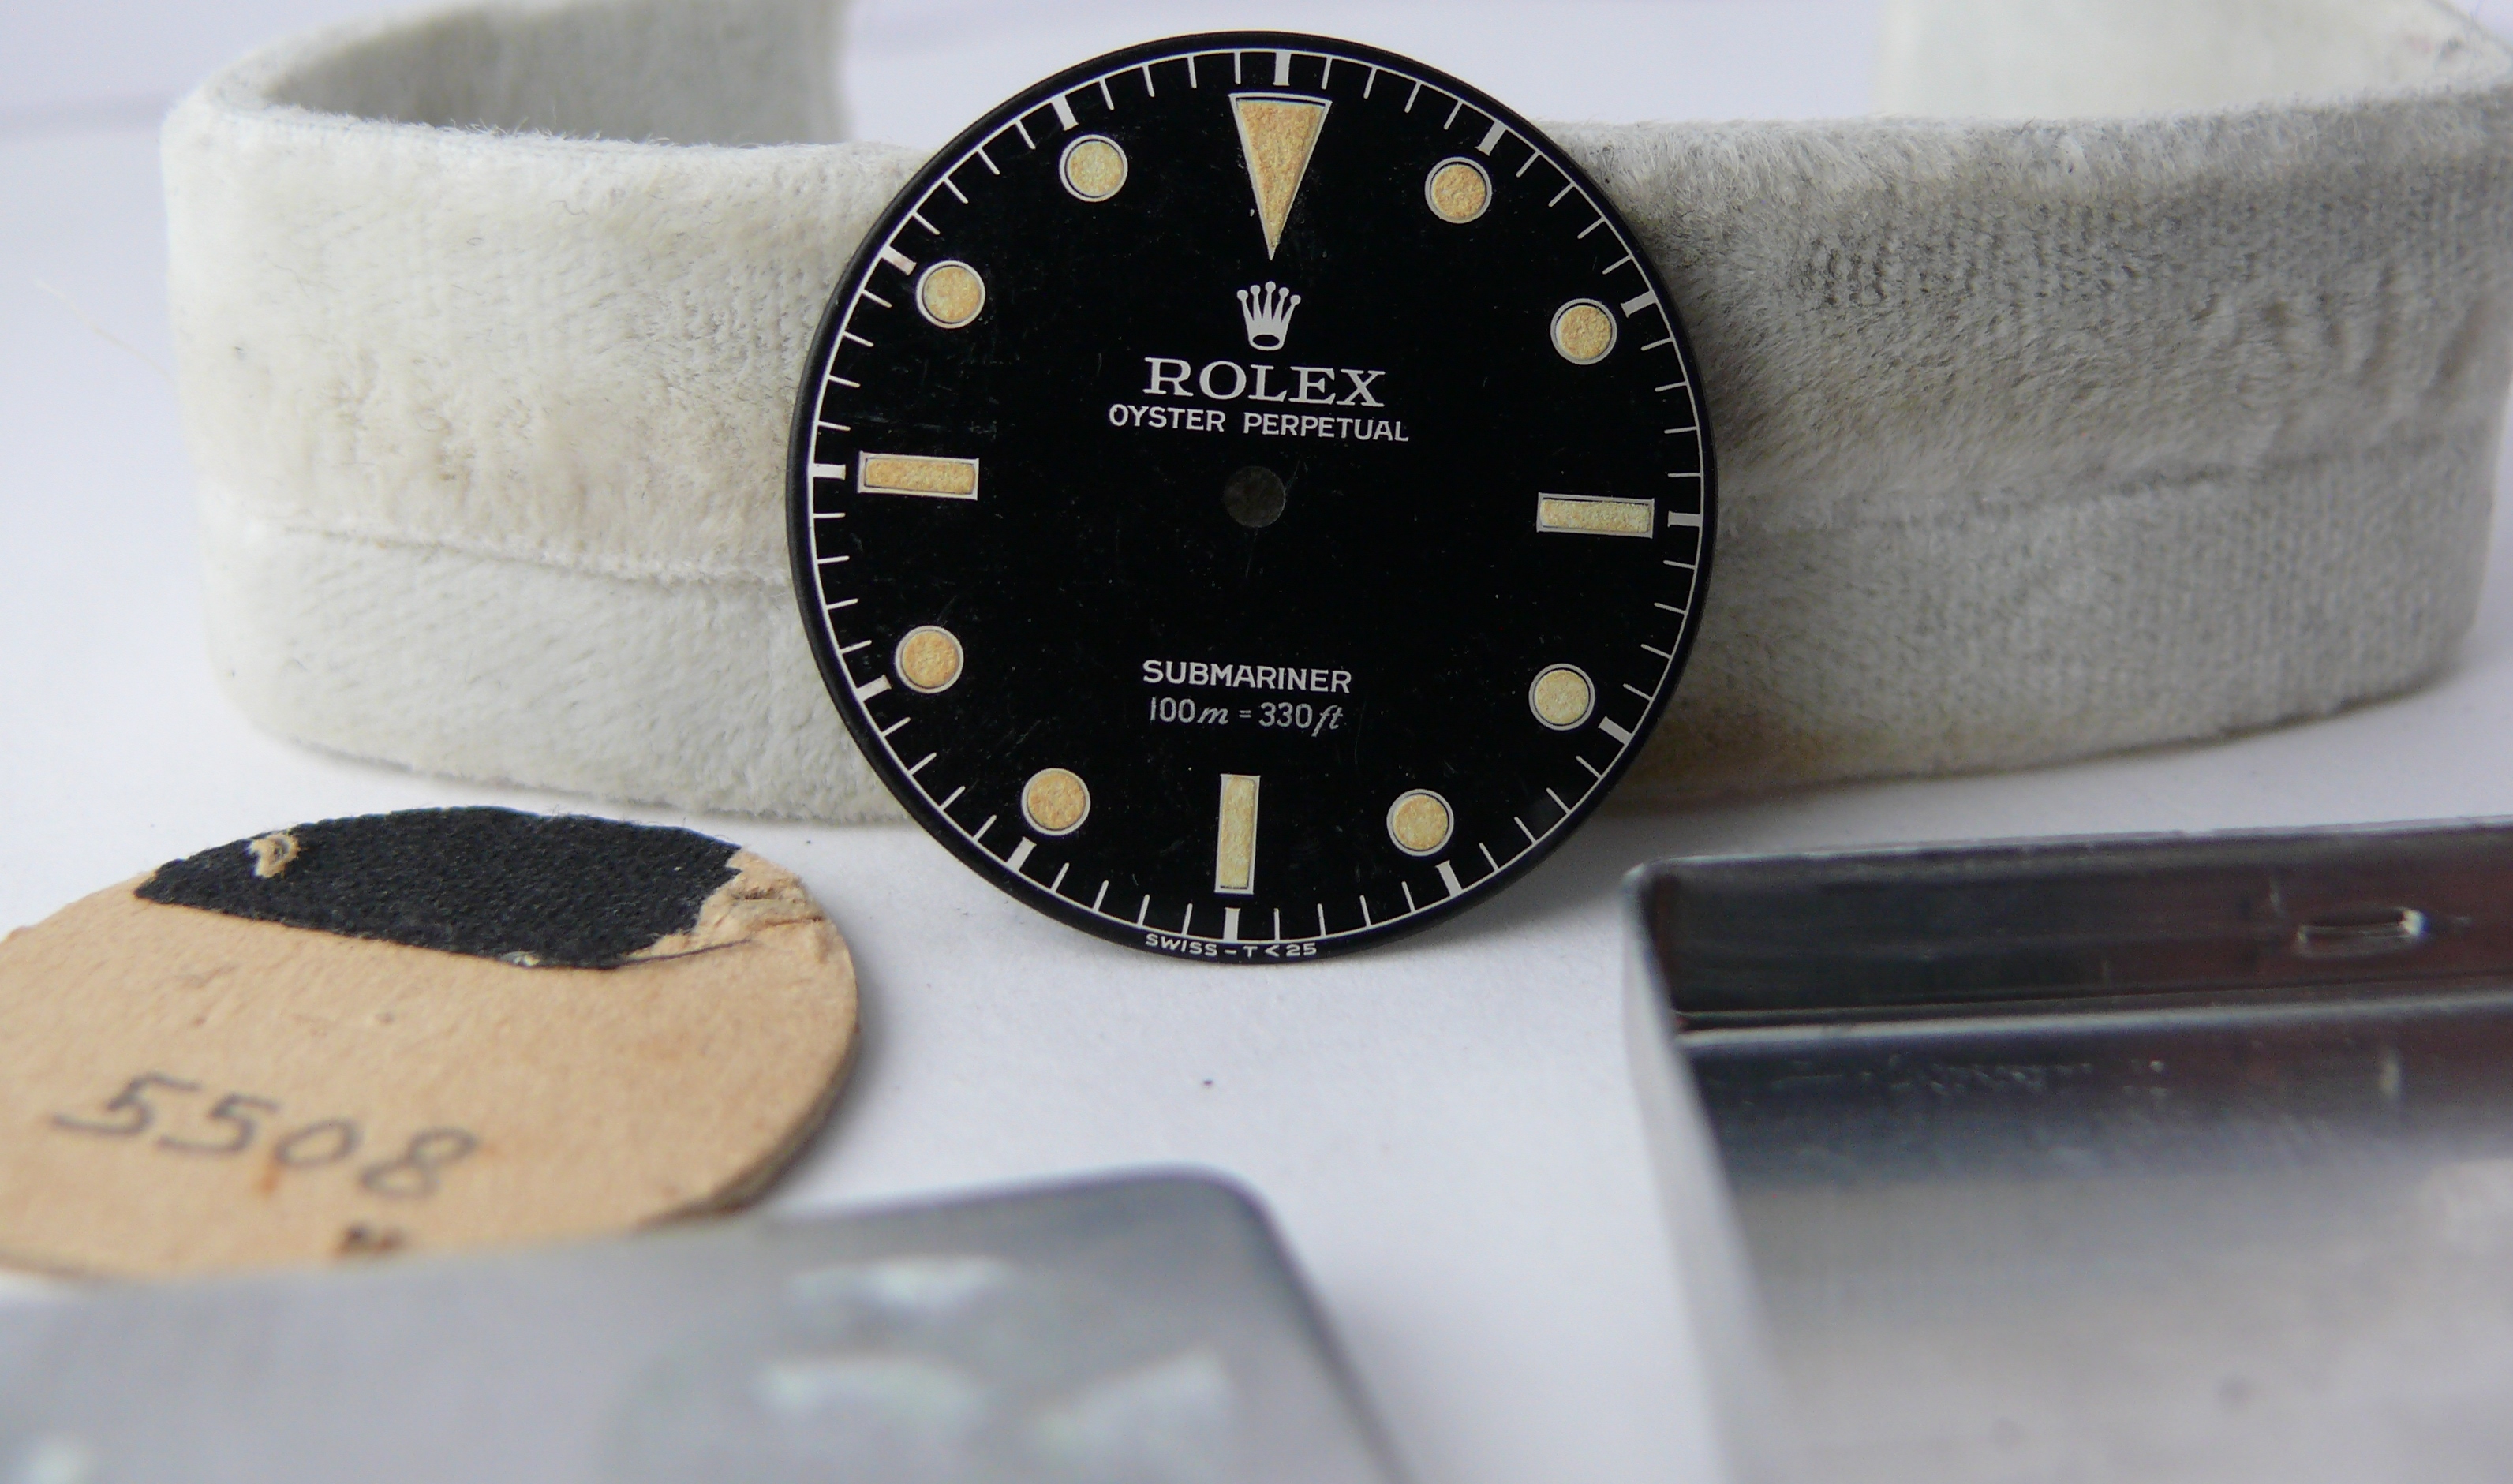 Vintage rolex submariner James Bond 5508 dial, gilt gloss early service dial - Image 3 of 8